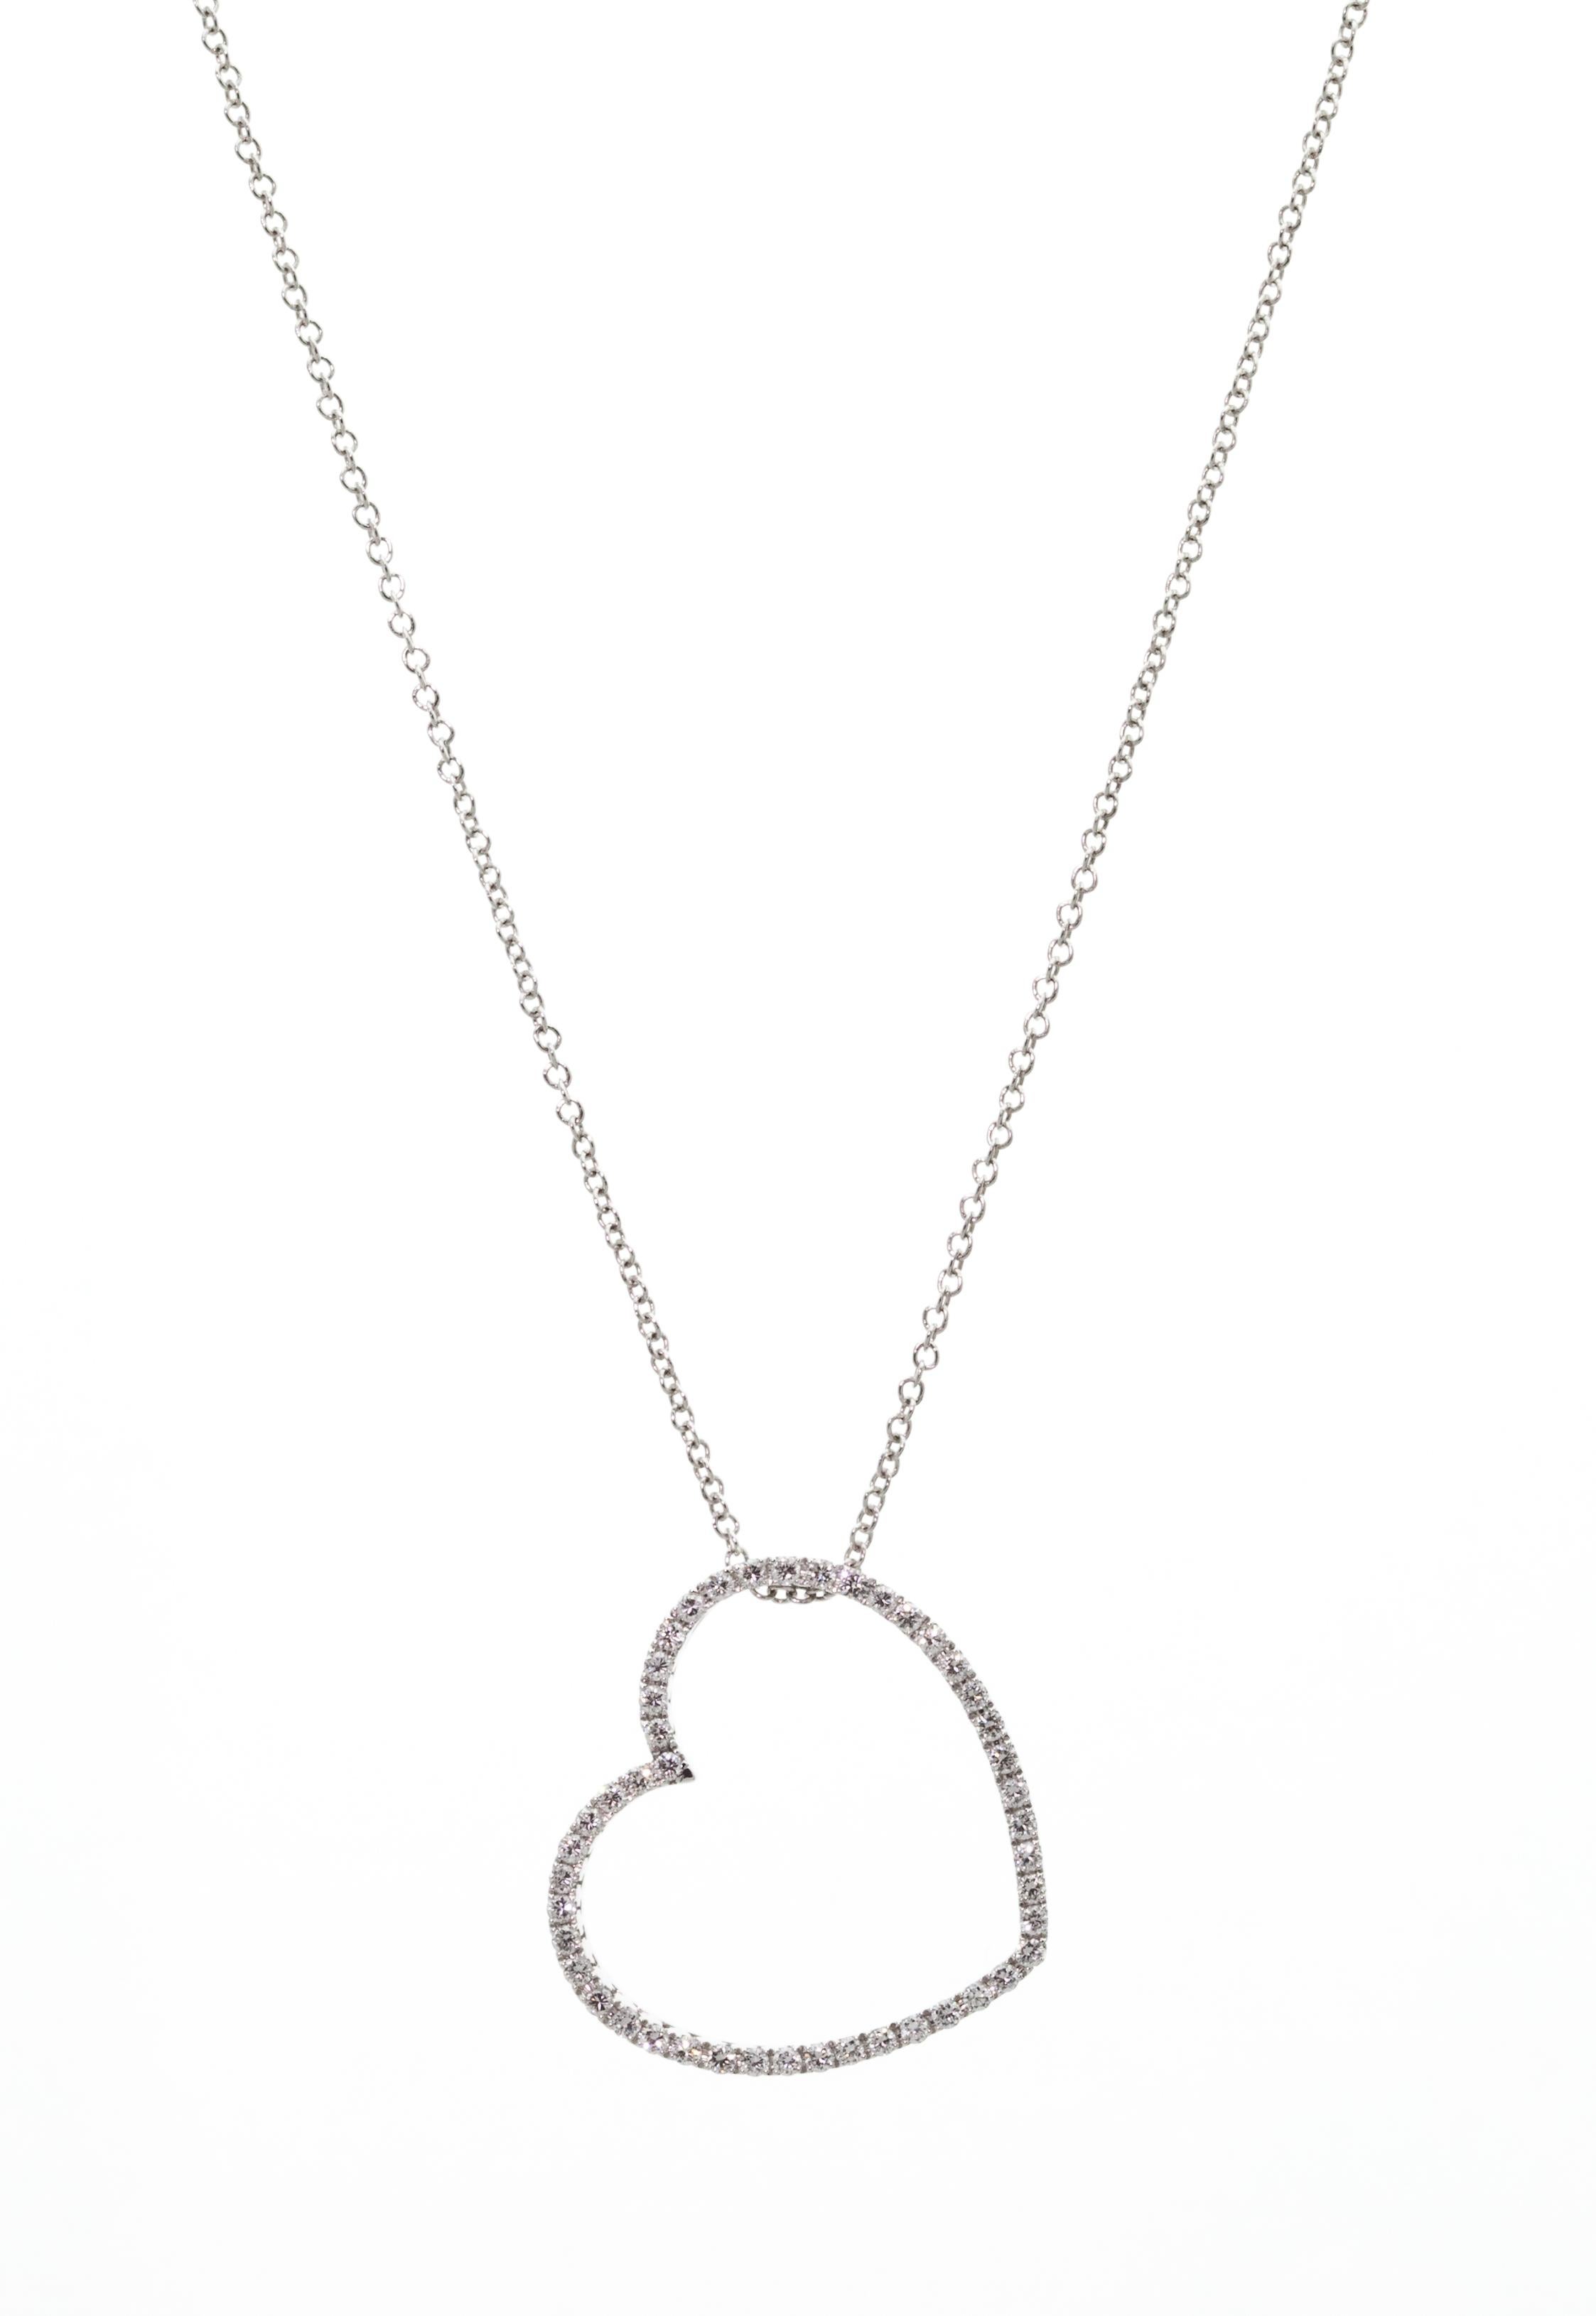 Ladies' open heart diamond pendant in 18kt white gold set with 0.58ct total of diamonds. Sliding on 1mm width 16